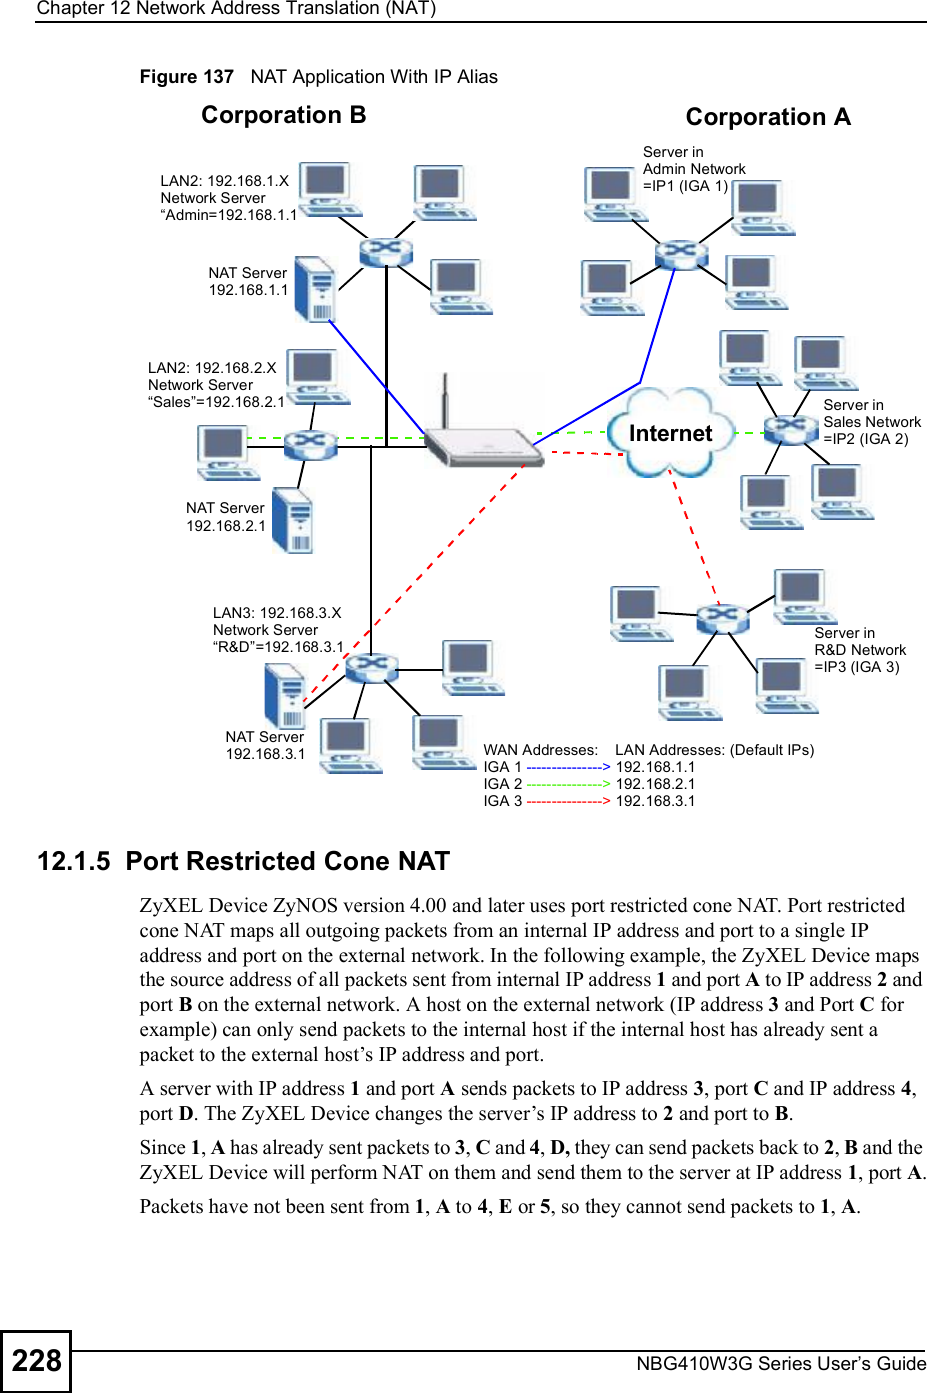 Chapter 12Network Address Translation (NAT)NBG410W3G Series User s Guide228Figure 137   NAT Application With IP Alias12.1.5  Port Restricted Cone NATZyXEL Device ZyNOS version 4.00 and later uses port restricted cone NAT. Port restricted cone NAT maps all outgoing packets from an internal IP address and port to a single IP address and port on the external network. In the following example, the ZyXEL Device maps the source address of all packets sent from internal IP address 1 and port A to IP address 2 and port B on the external network. A host on the external network (IP address 3 and Port C for example) can only send packets to the internal host if the internal host has already sent a packet to the external host!s IP address and port. A server with IP address 1 and port A sends packets to IP address 3, port C and IP address 4, port D. The ZyXEL Device changes the server!s IP address to 2 and port to B. Since 1, A has already sent packets to 3, C and 4, D, they can send packets back to 2, B and the ZyXEL Device will perform NAT on them and send them to the server at IP address 1, port A.Packets have not been sent from 1, A to 4, E or 5, so they cannot send packets to 1, A.InternetCorporation BNAT Server192.168.3.1LAN3: 192.168.3.XNetwork Server&quot;R&amp;D#=192.168.3.1WAN Addresses:    LAN Addresses: (Default IPs)IGA 1 ---------------&gt; 192.168.1.1IGA 2 ---------------&gt; 192.168.2.1IGA 3 ---------------&gt; 192.168.3.1NAT Server192.168.2.1LAN2: 192.168.2.XNetwork Server&quot;Sales#=192.168.2.1Server inR&amp;D Network=IP3 (IGA 3)NAT Server192.168.1.1LAN2: 192.168.1.XNetwork Server&quot;Admin=192.168.1.1Corporation AServer inSales Network=IP2 (IGA 2)Server inAdmin Network=IP1 (IGA 1)